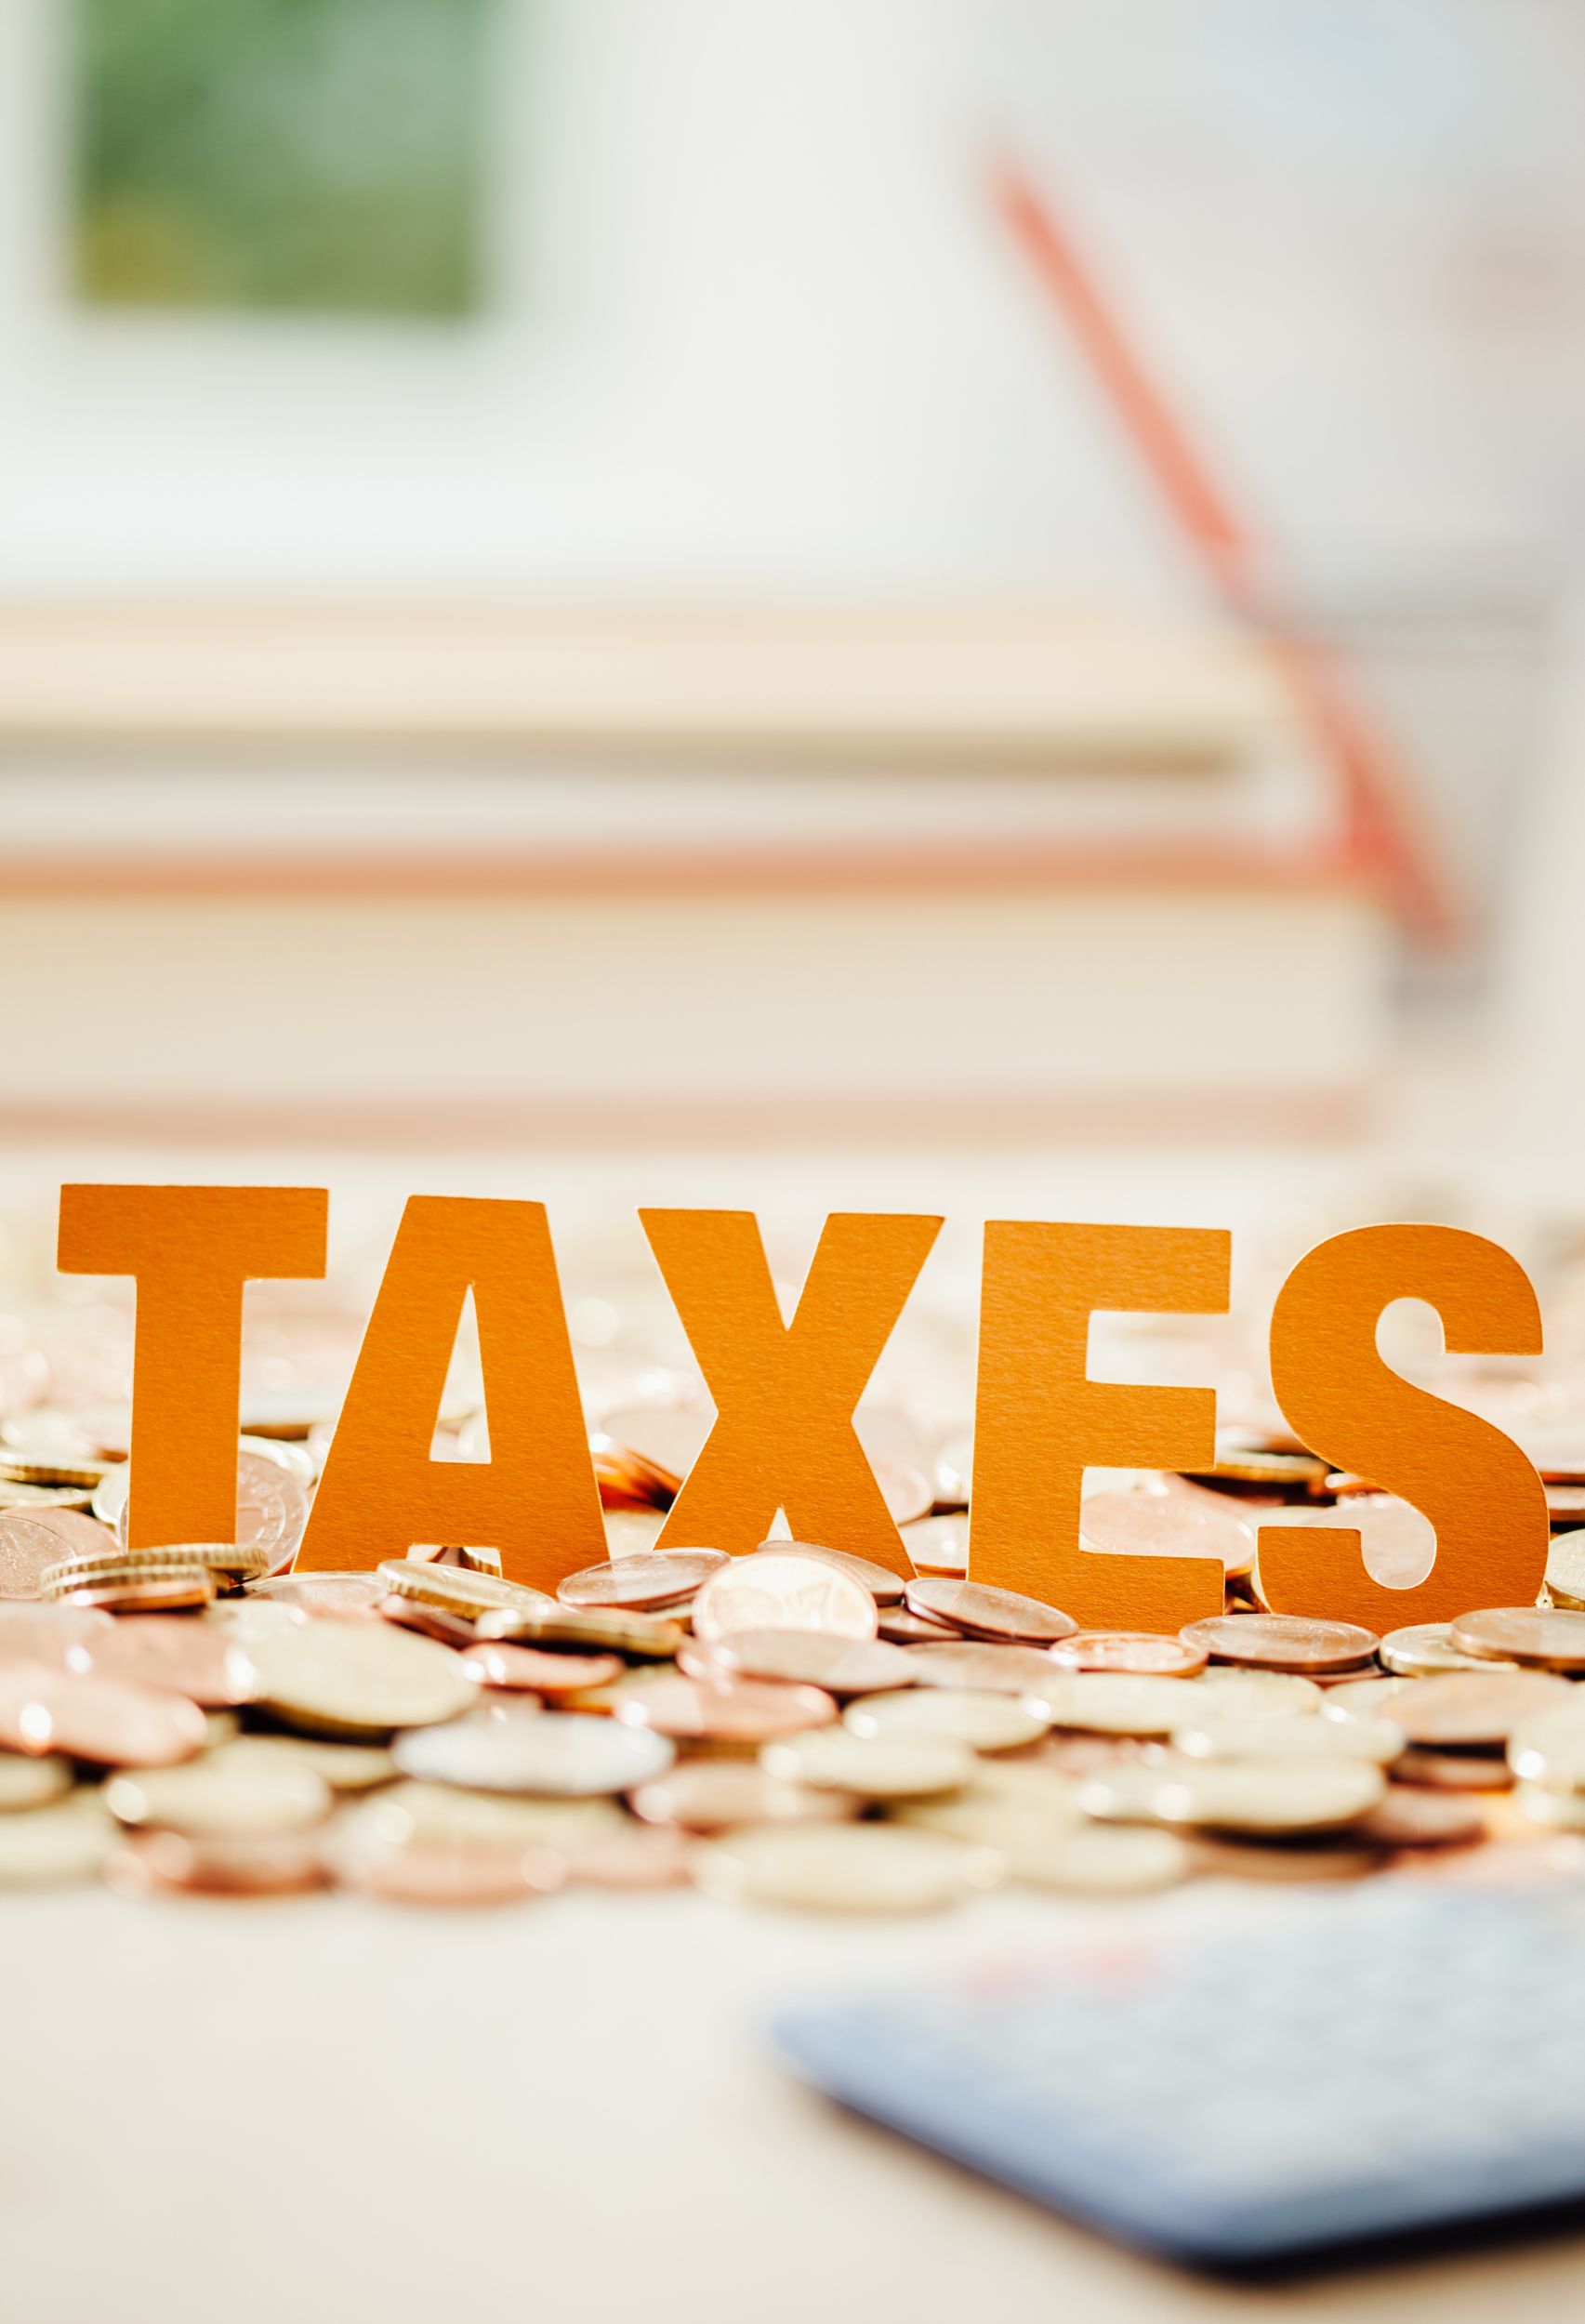 Best Practices for Your Small Business Taxes